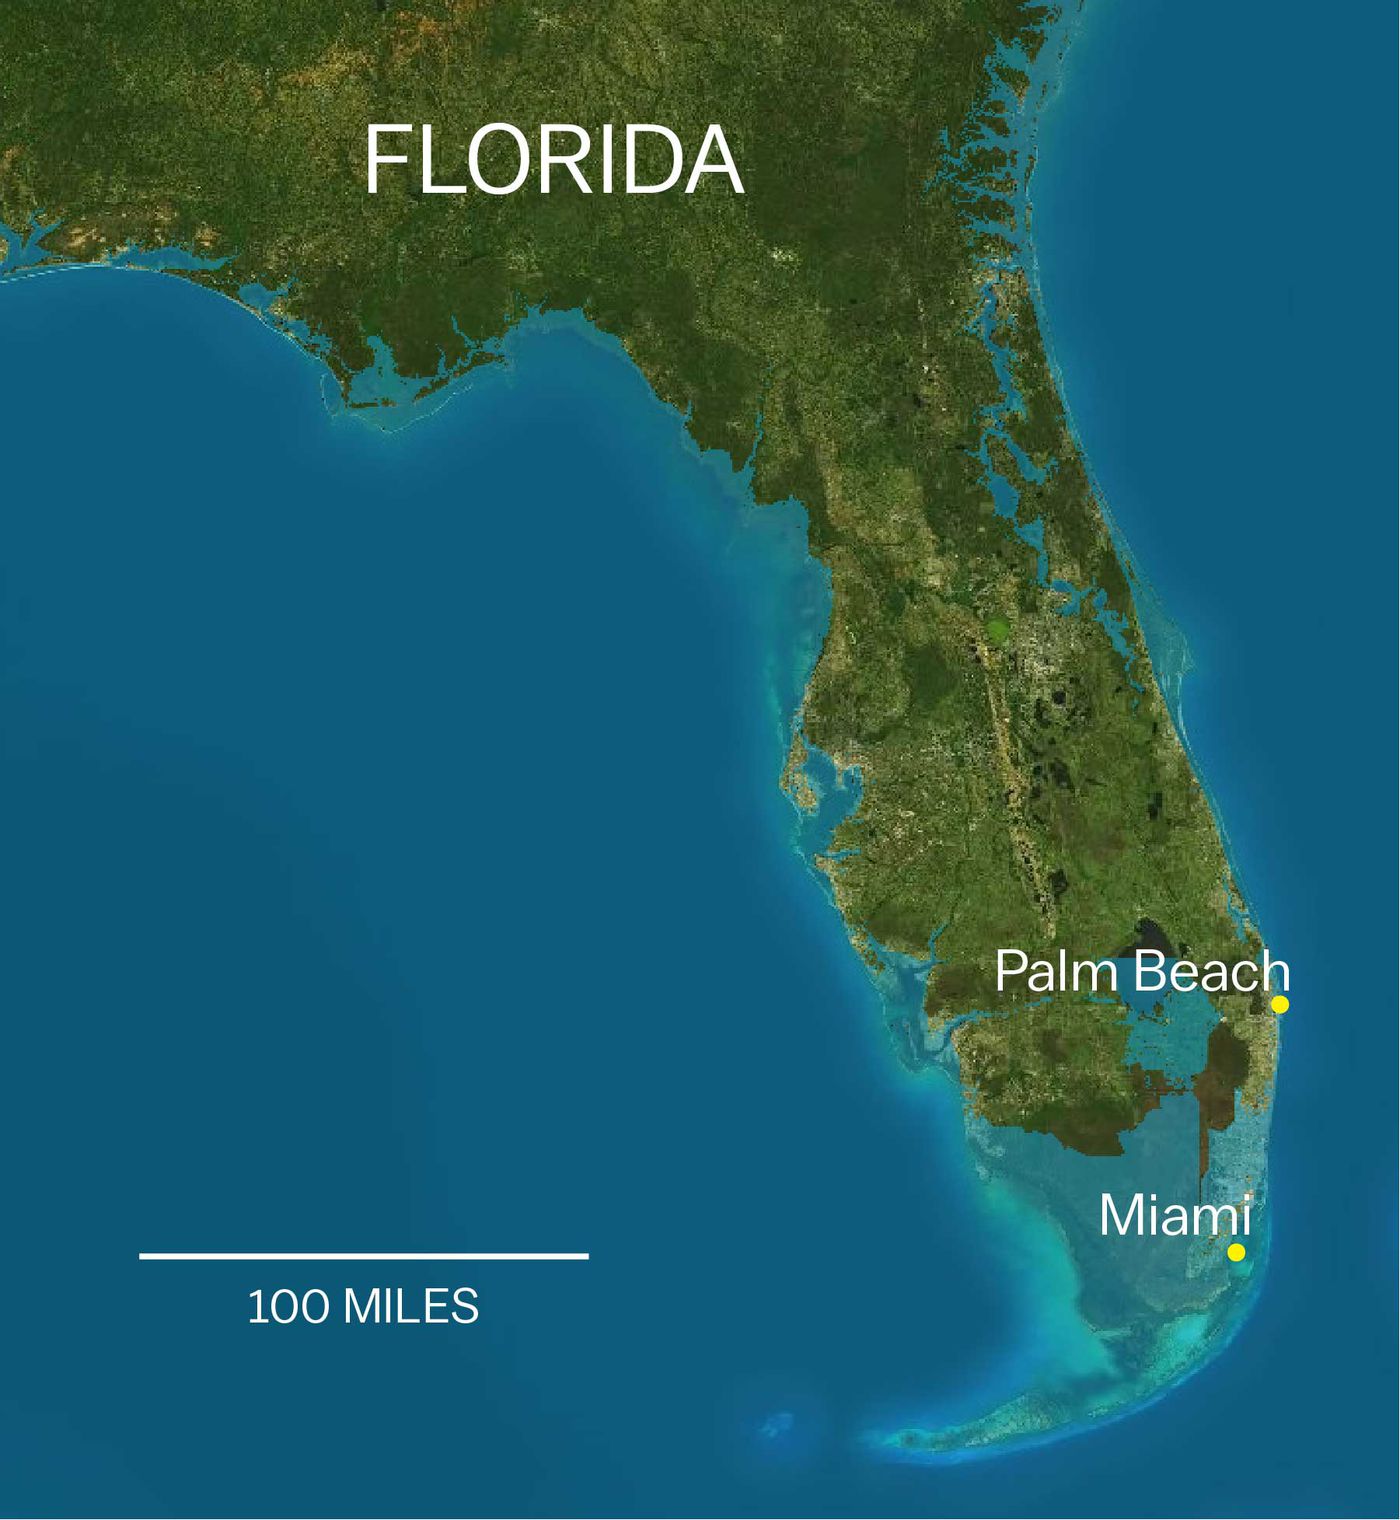 is florida below sea level or above